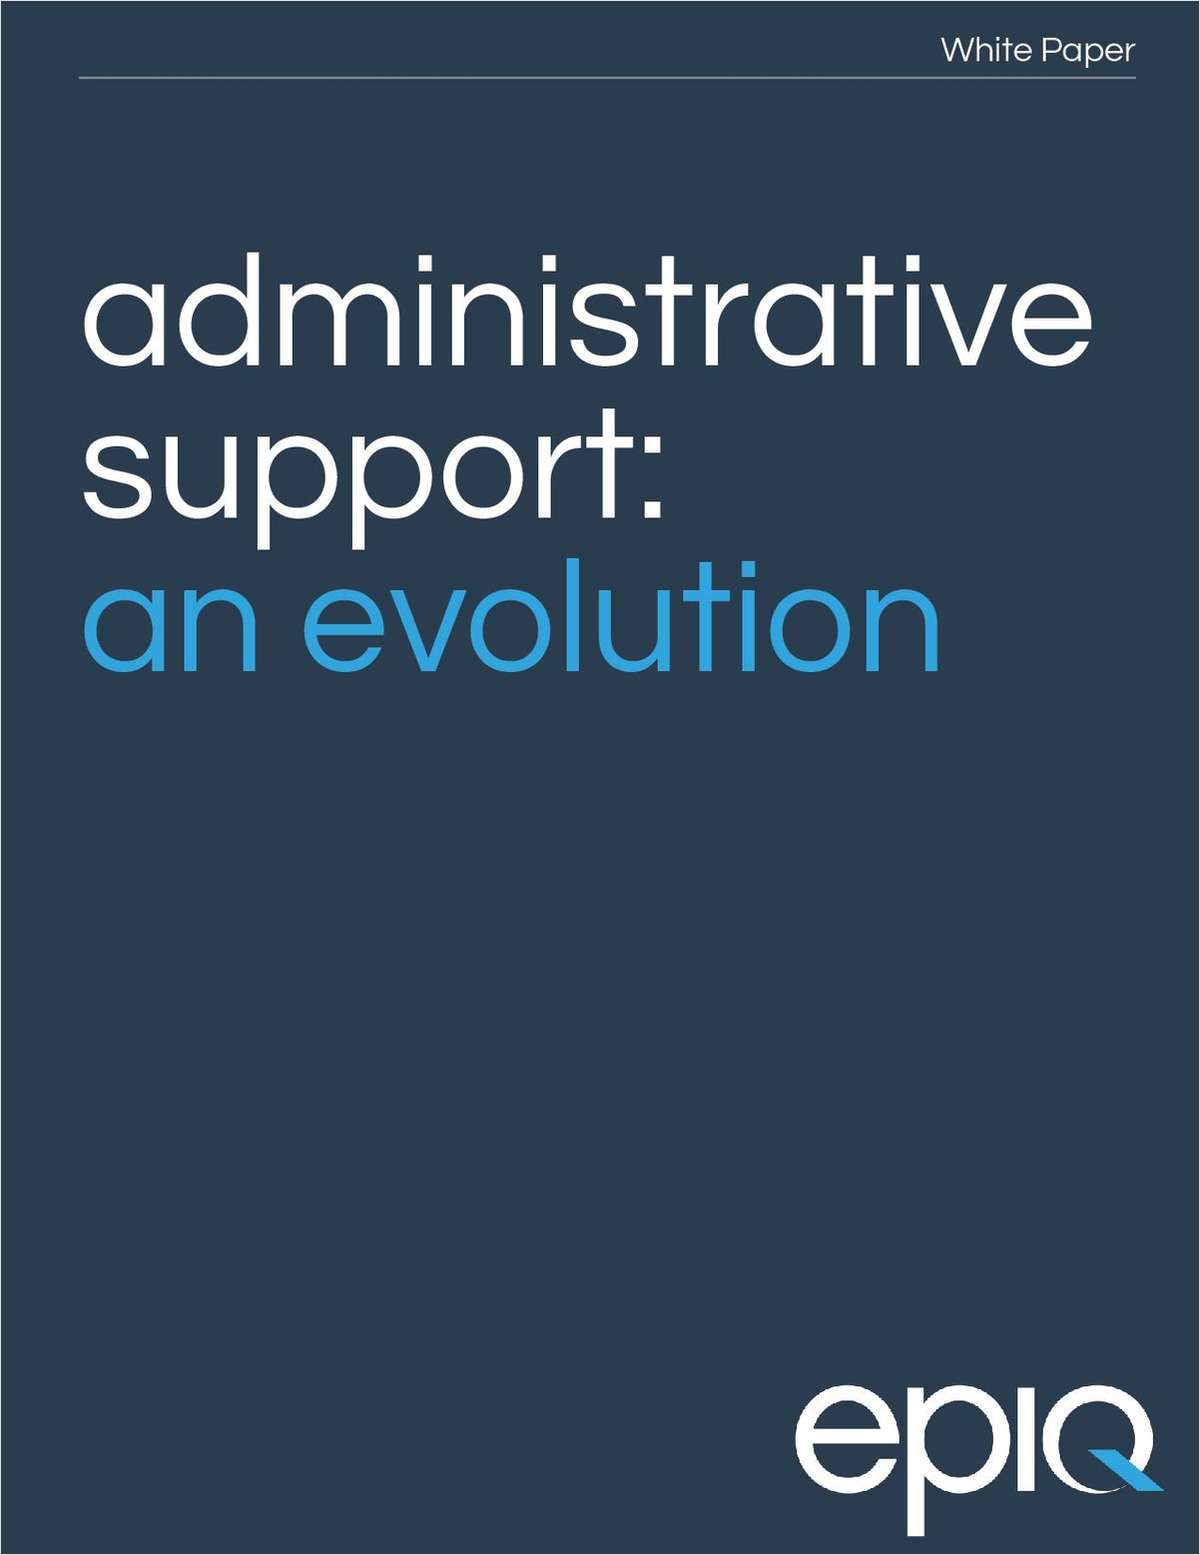 Over the last few years, firms have had to accelerate digital transformation efforts as well as people’s ability to work remotely or in a hybrid environment. With more employees continuing to work remotely, administrative support is rapidly evolving to support this type of environment. Download this white paper to learn how law firms can creatively expand the administrative role to meet the needs of current and future team members.